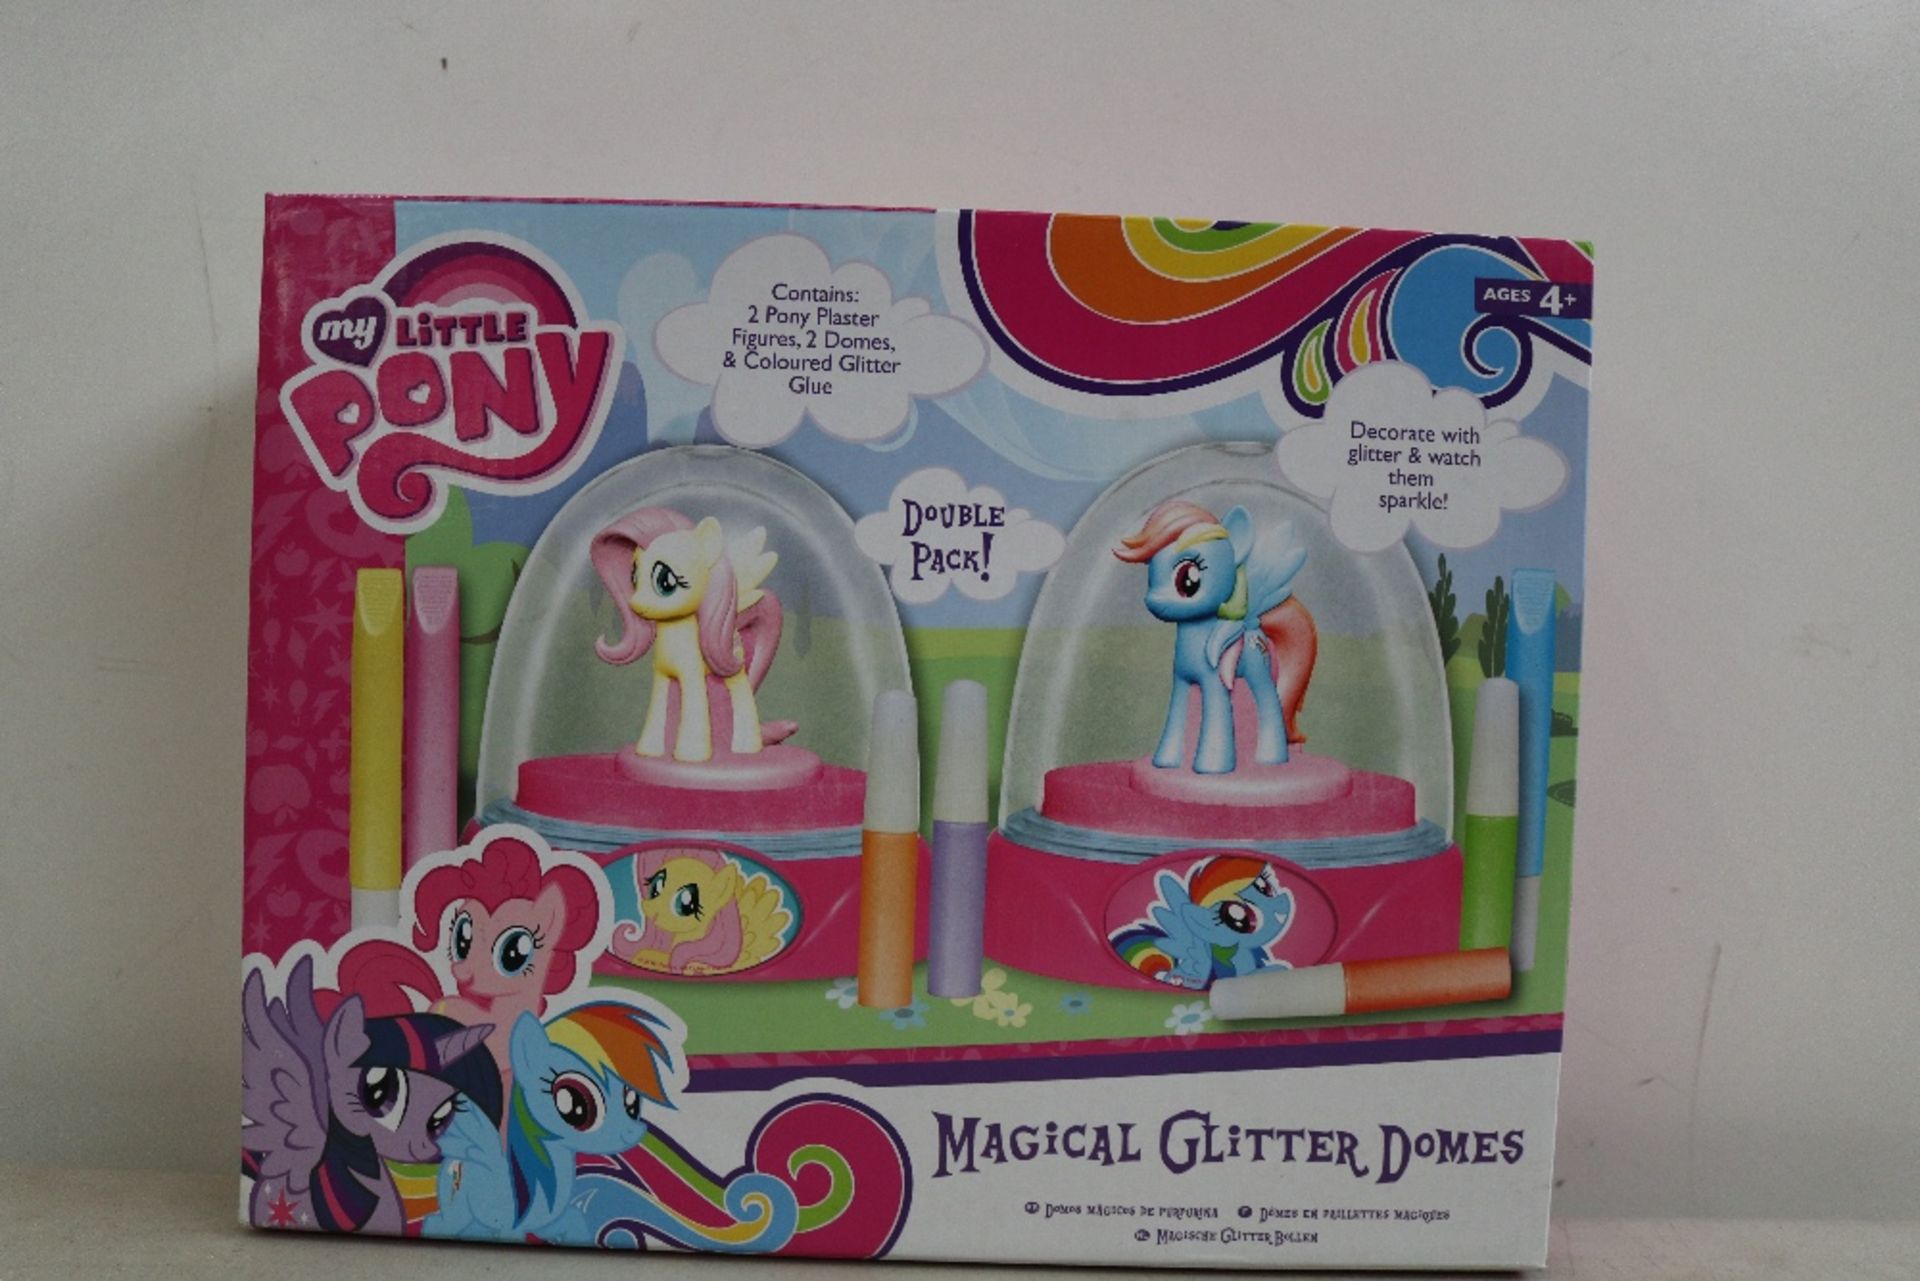 My Little Pony magical glitter domes (double pack), new and boxed.